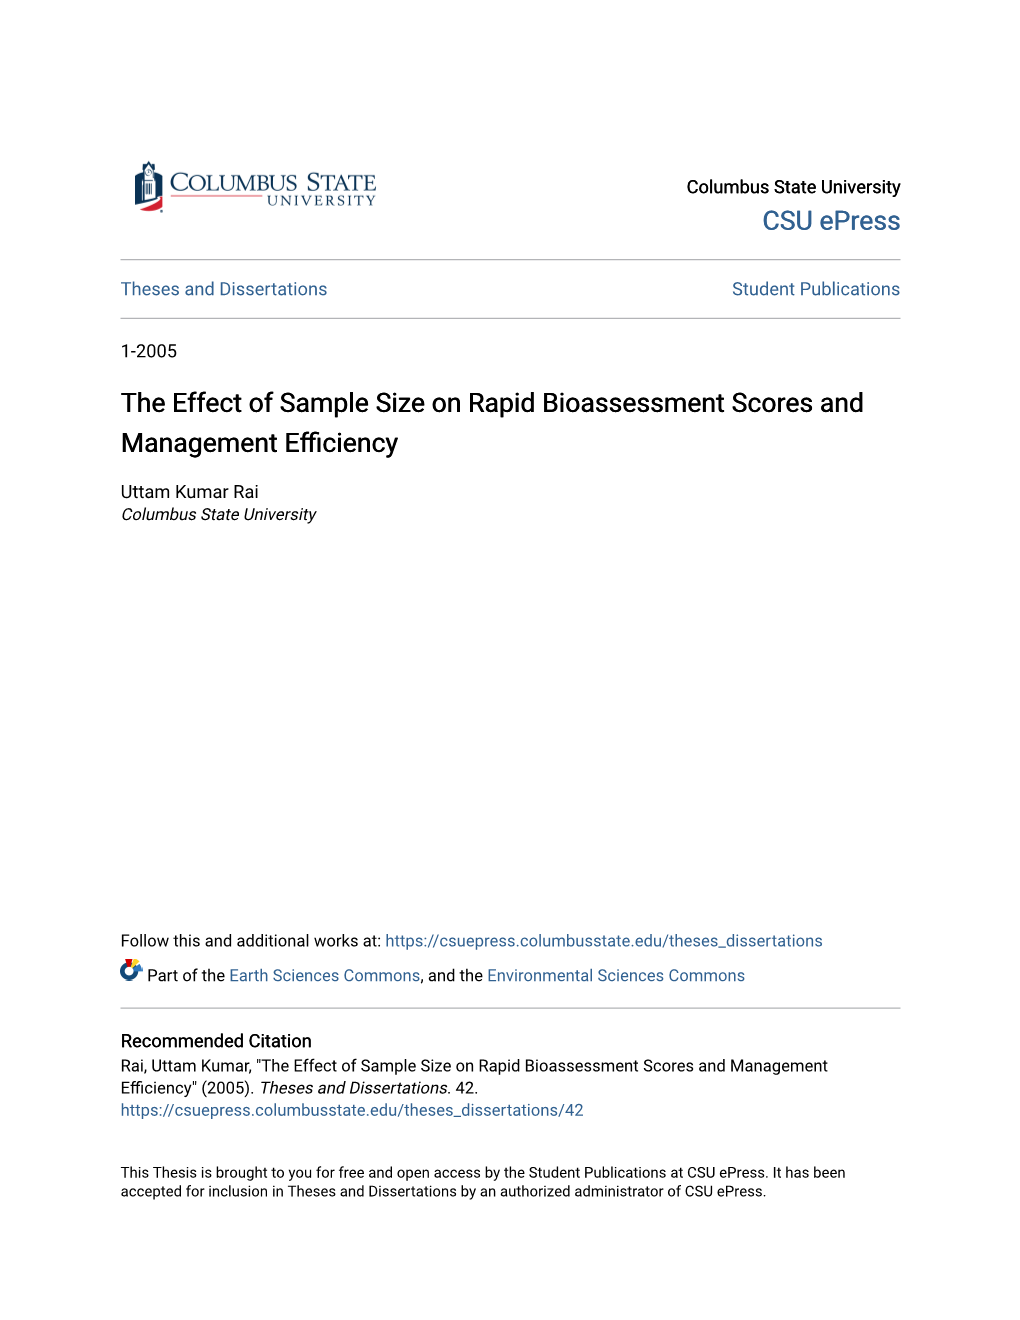 The Effect of Sample Size on Rapid Bioassessment Scores and Management Efficiency